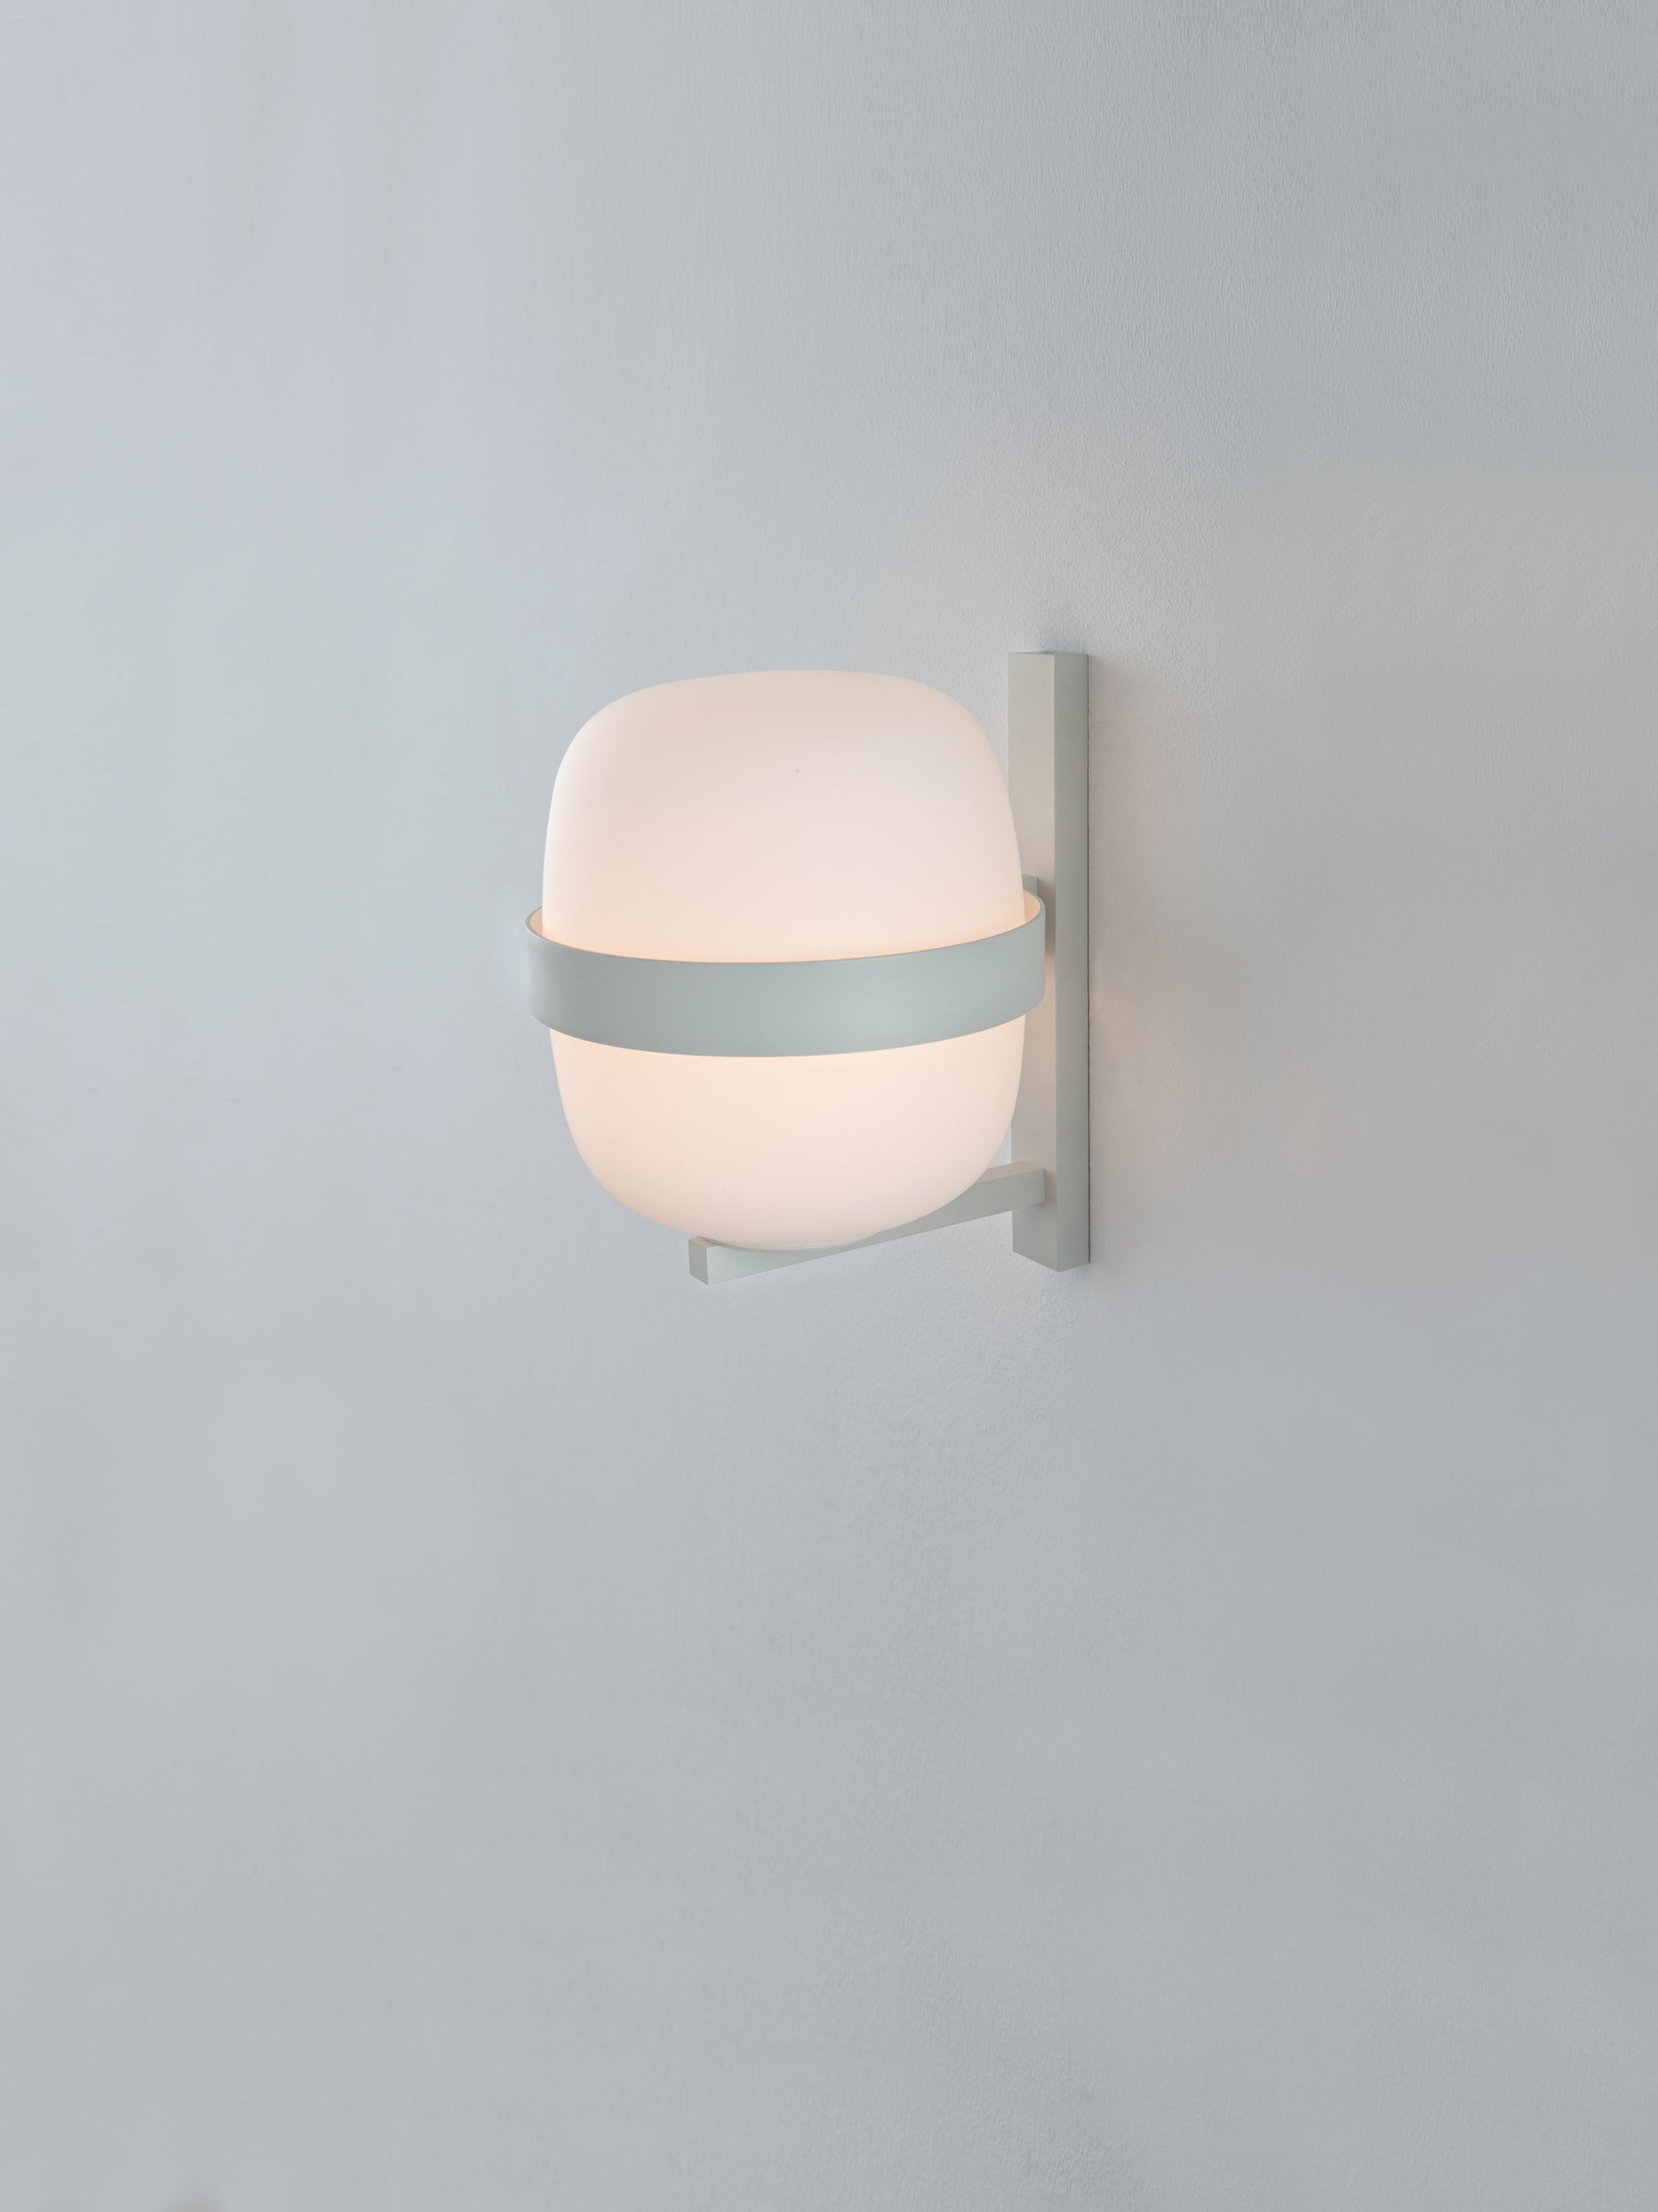 White wally wall lamp by Miguel Milá
Dimensions: D 18.4 x W 10 x H 24 cm
Materials: metal, glass.
Also available in black.

In the wally lamp, the iconic globe-shaped shade from the Cesta family is supported by a metallic ring in white or